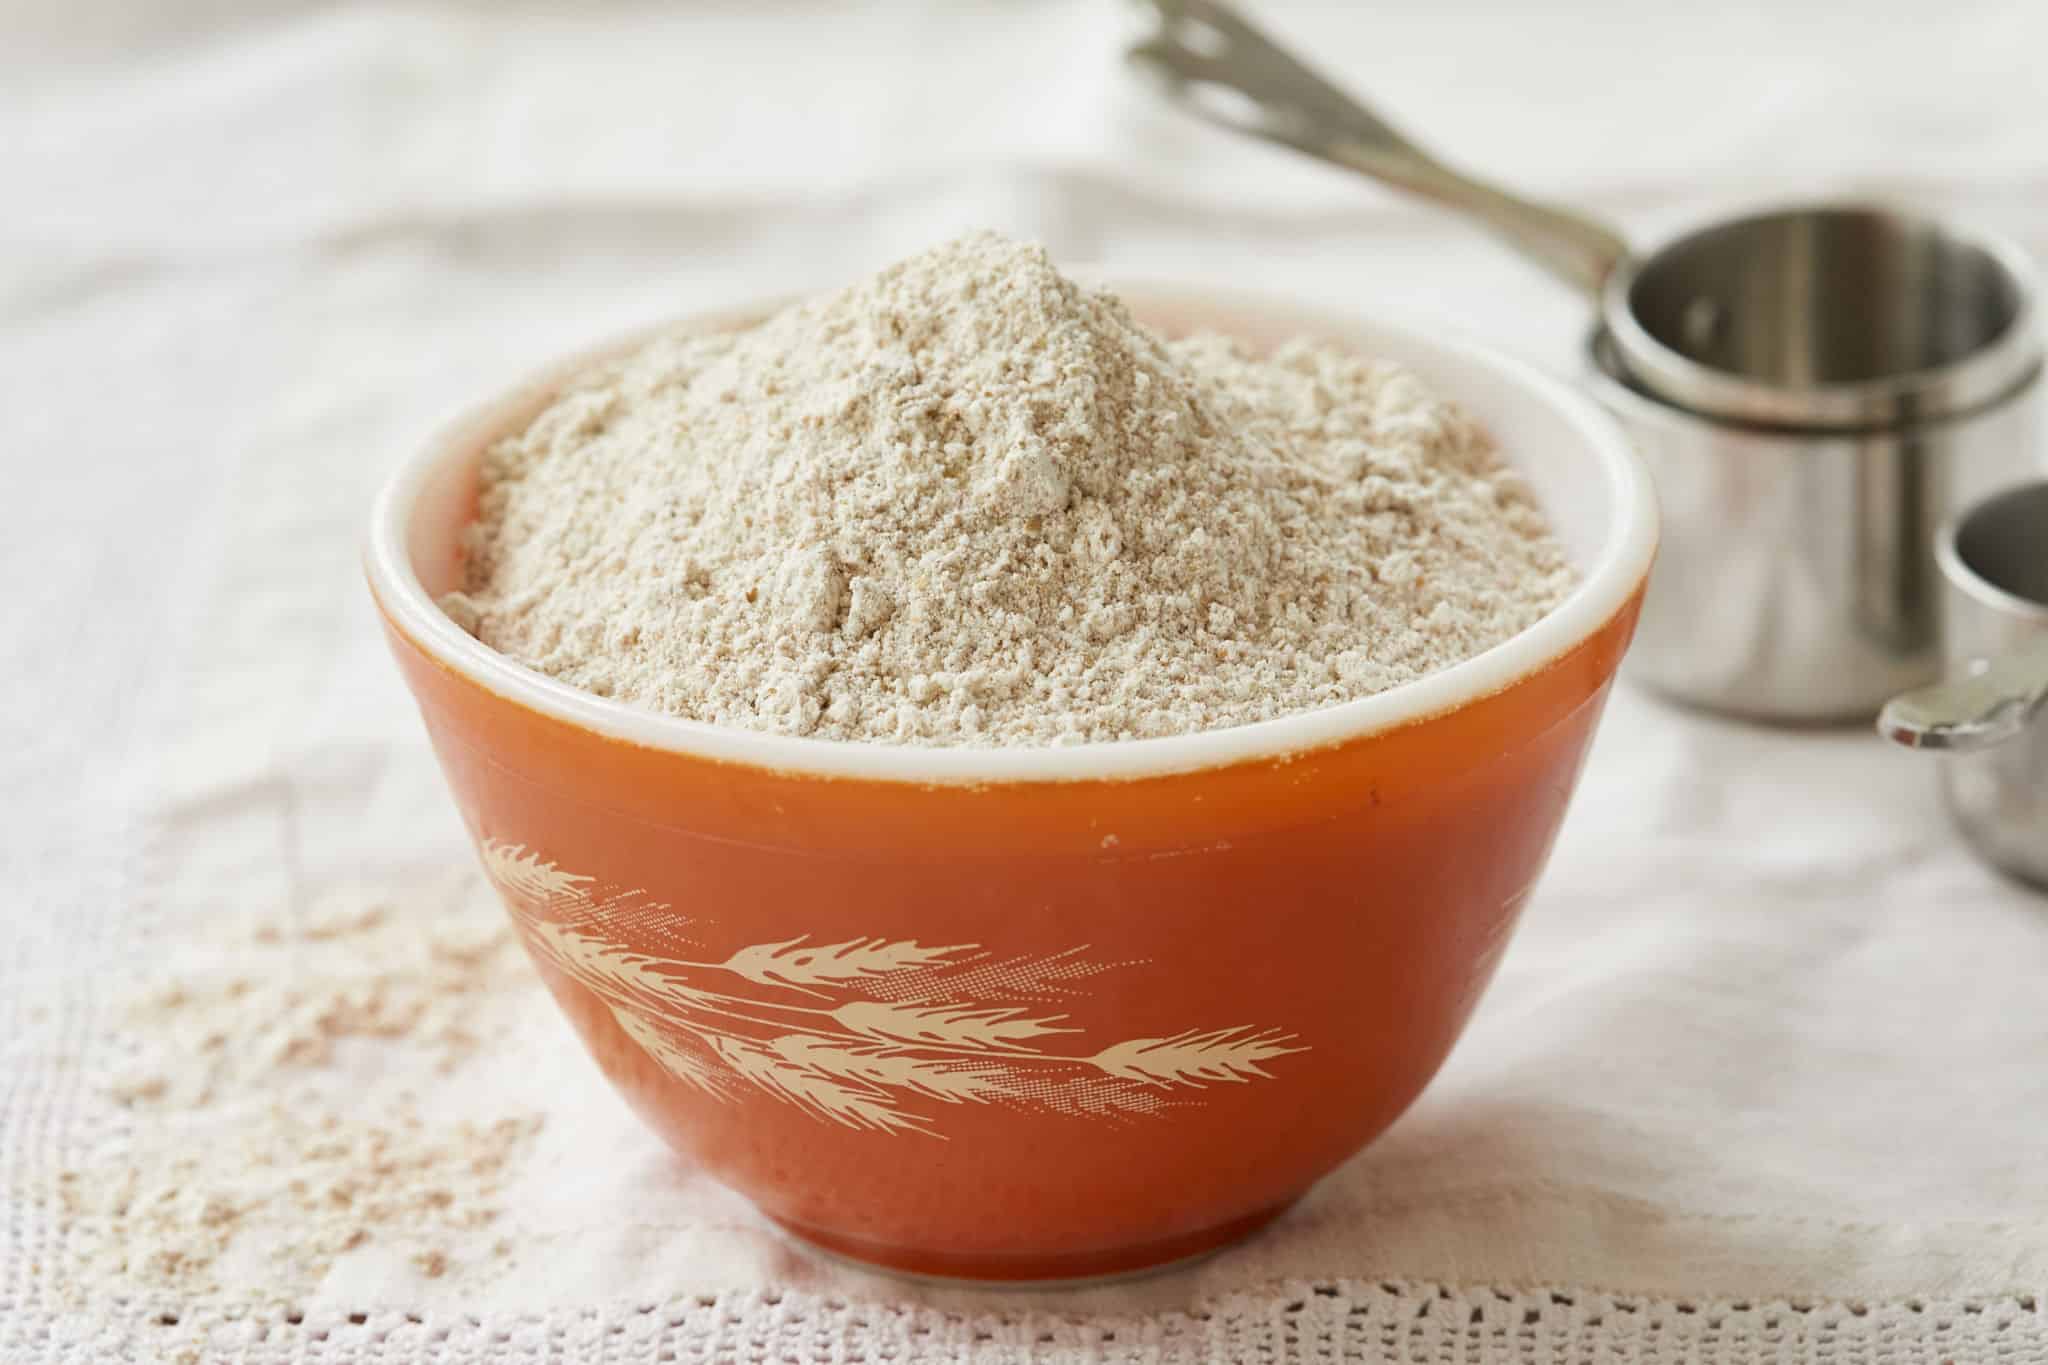 A orange Pyrex bowl with wheat grains is overflowing with whole wheat flour.